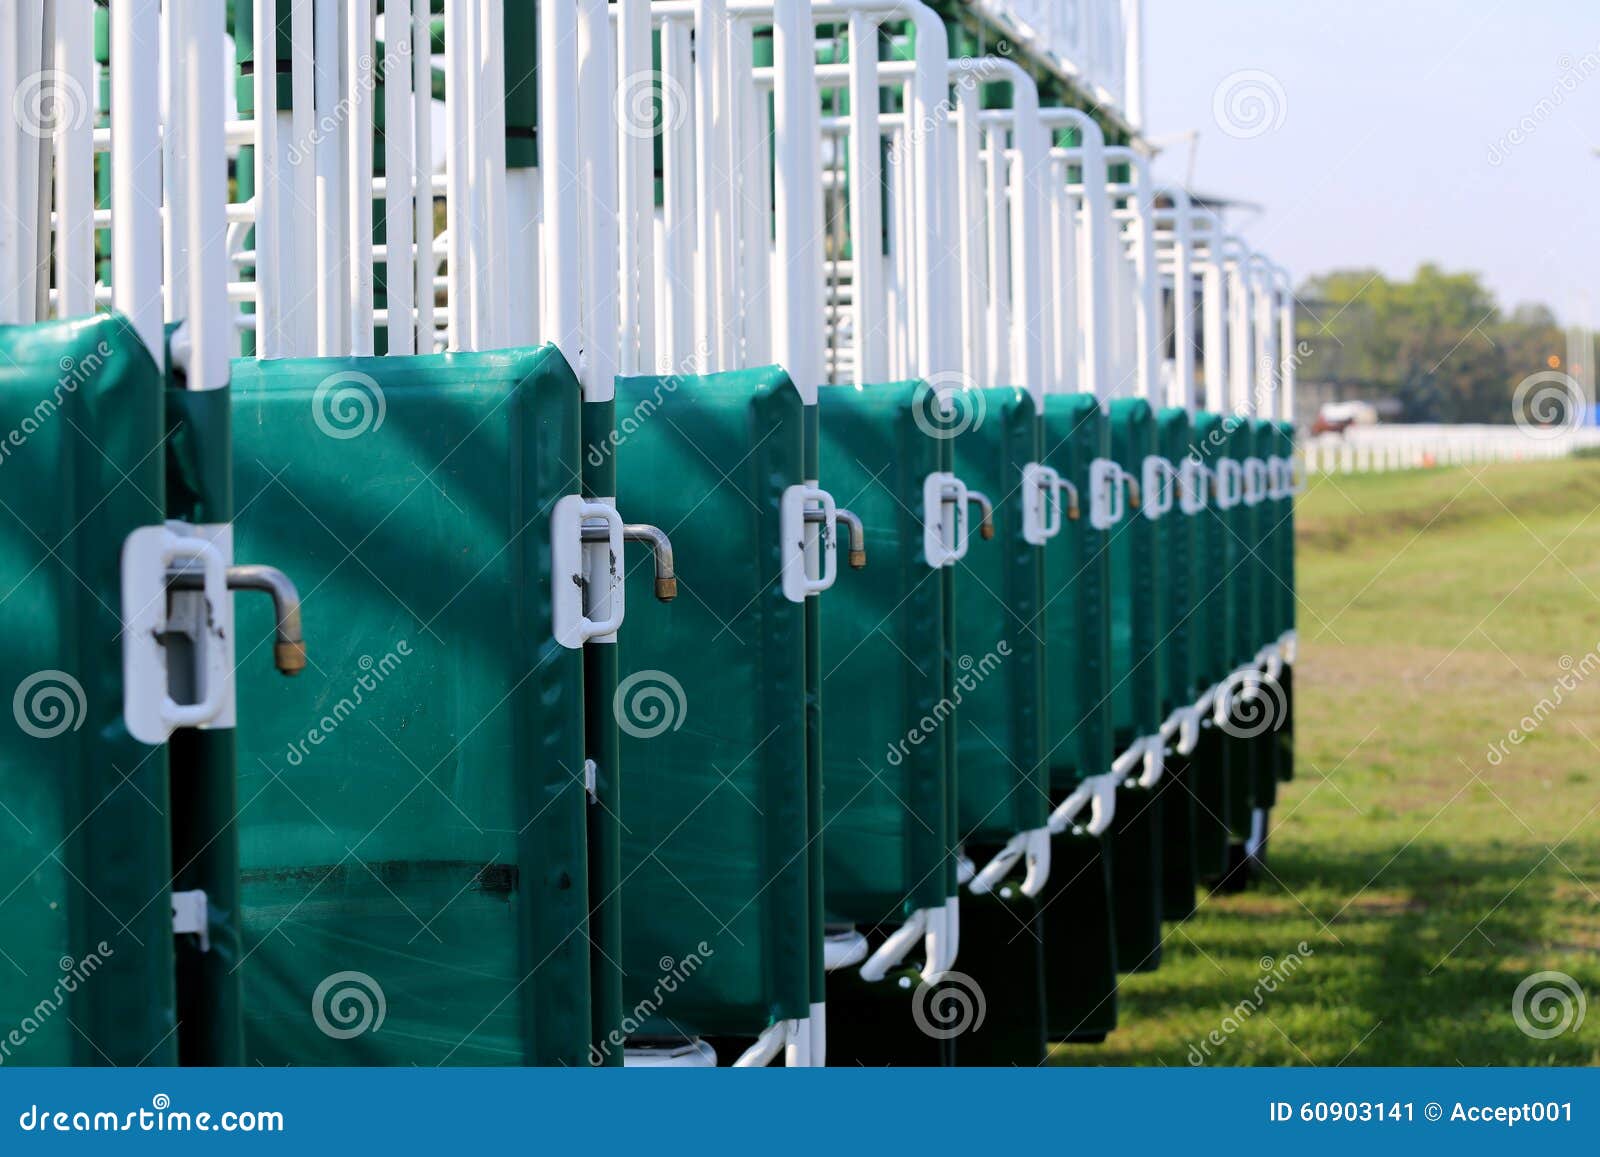 Horse Racing Starting Gates Photos Free Royalty Free Stock Photos From Dreamstime